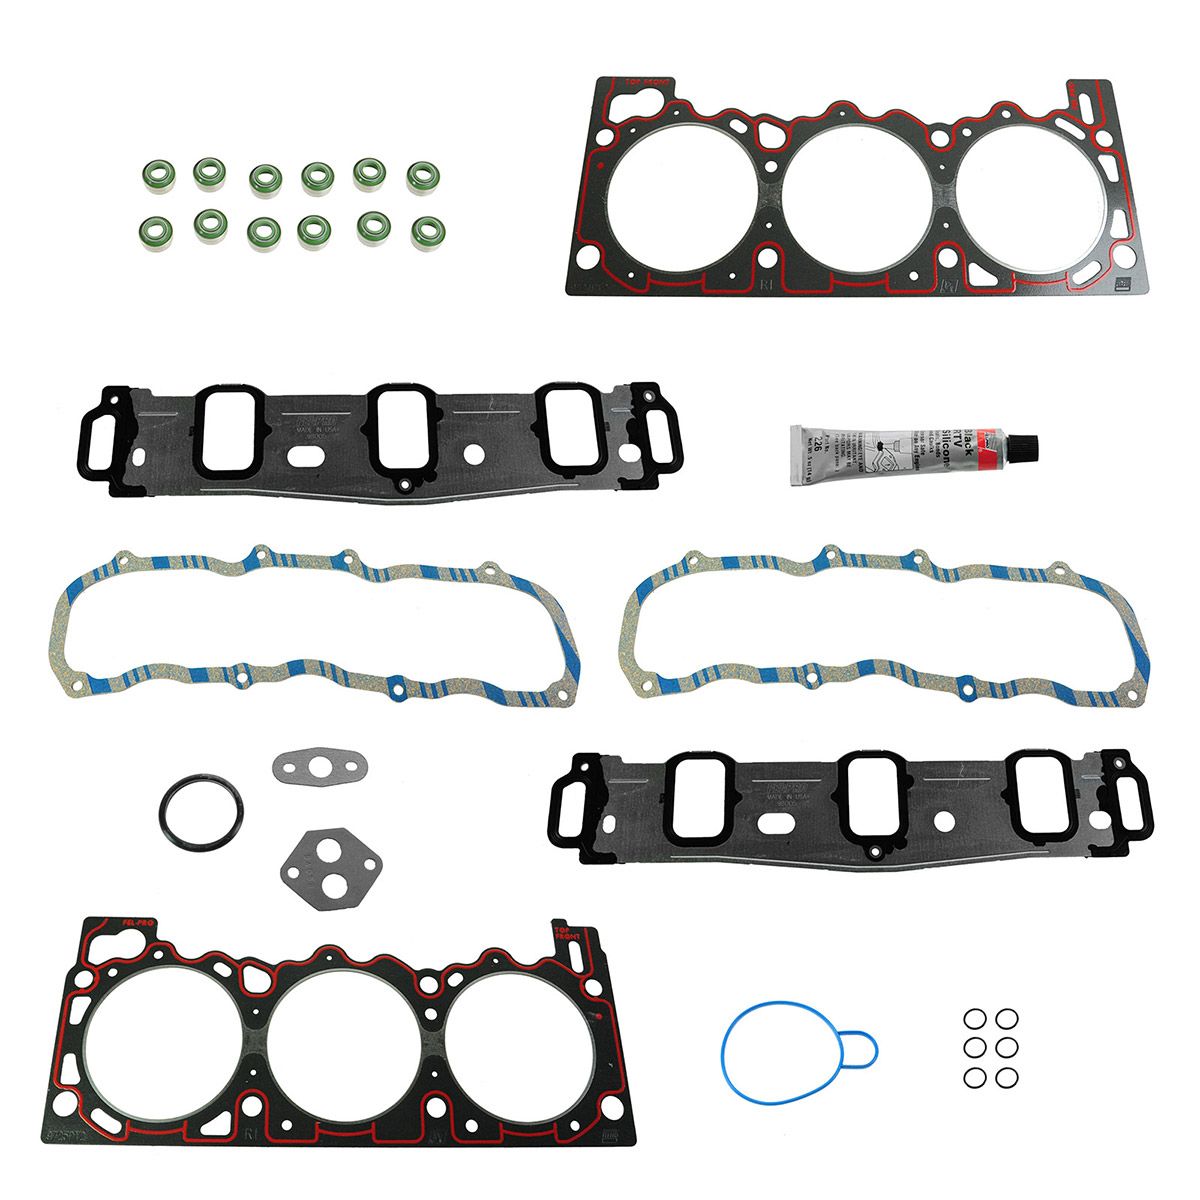 Ford explorer, replace head gasket